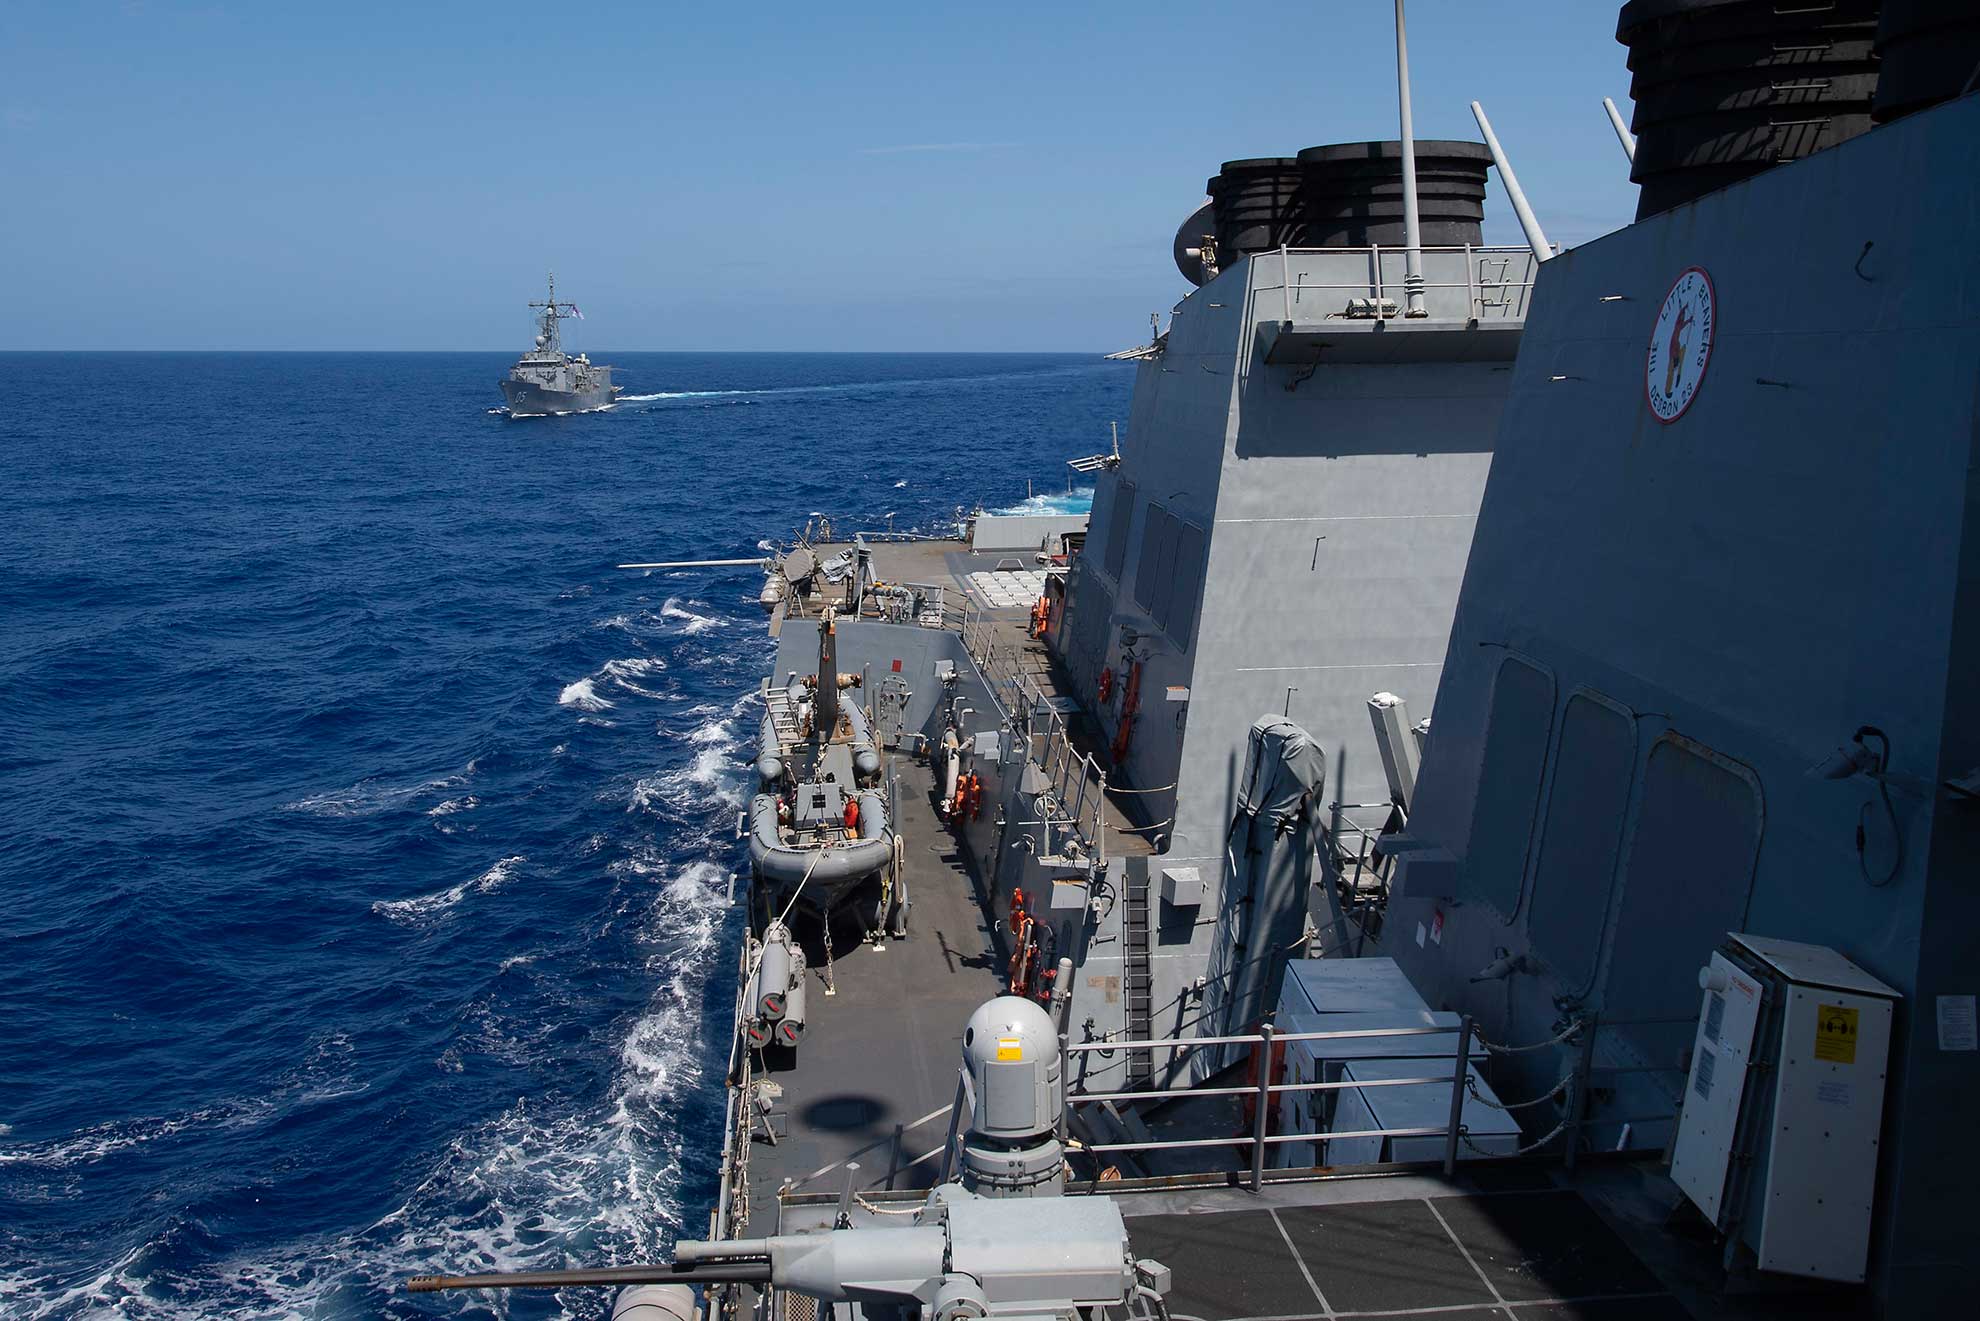 Philippine Sea (April 18, 2019) The Arleigh Burke-class guided-missile destroyer USS Preble (DDG 88) and the Royal Australian Navy Adelaide-class guided-missile frigate HMAS Melbourne (FFG 05) transit in formation during a cooperative deployment. Preble and Melbourne are participating in a cooperative deployment in order to improve on maritime capabilities between partners. Preble is deployed to the U.S 7th Fleet area of operations in support of security and stability in the Indo-Pacific region. (U.S. Navy photo by MCS 1st Class Bryan Niegel. -